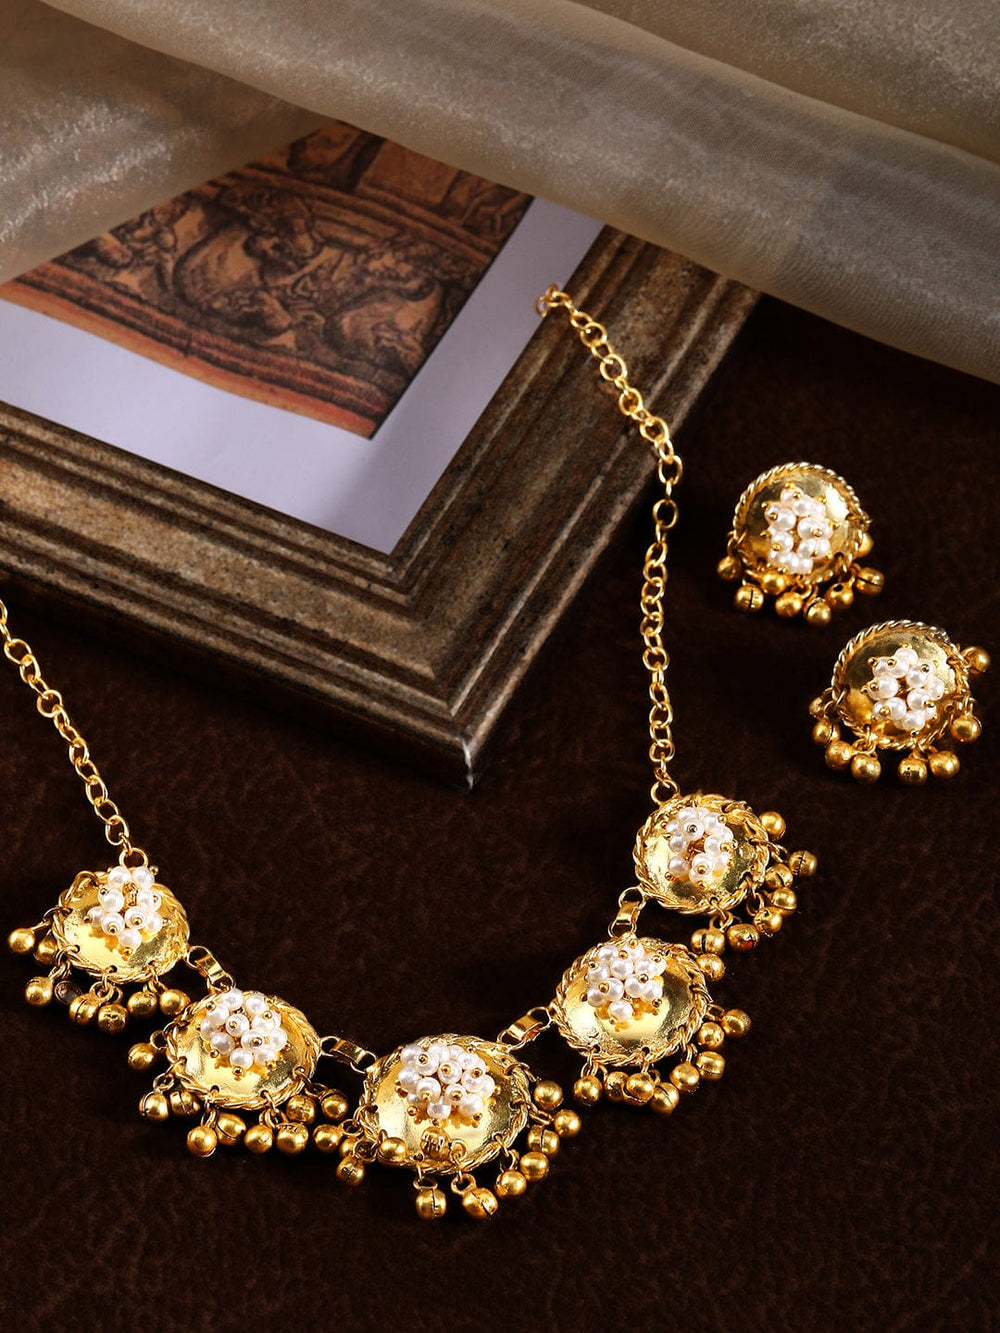 Rubans 24K Gold Plated Handcrafted Necklace Set With Circular Design, Pearls & Golden Beads. Necklace Set